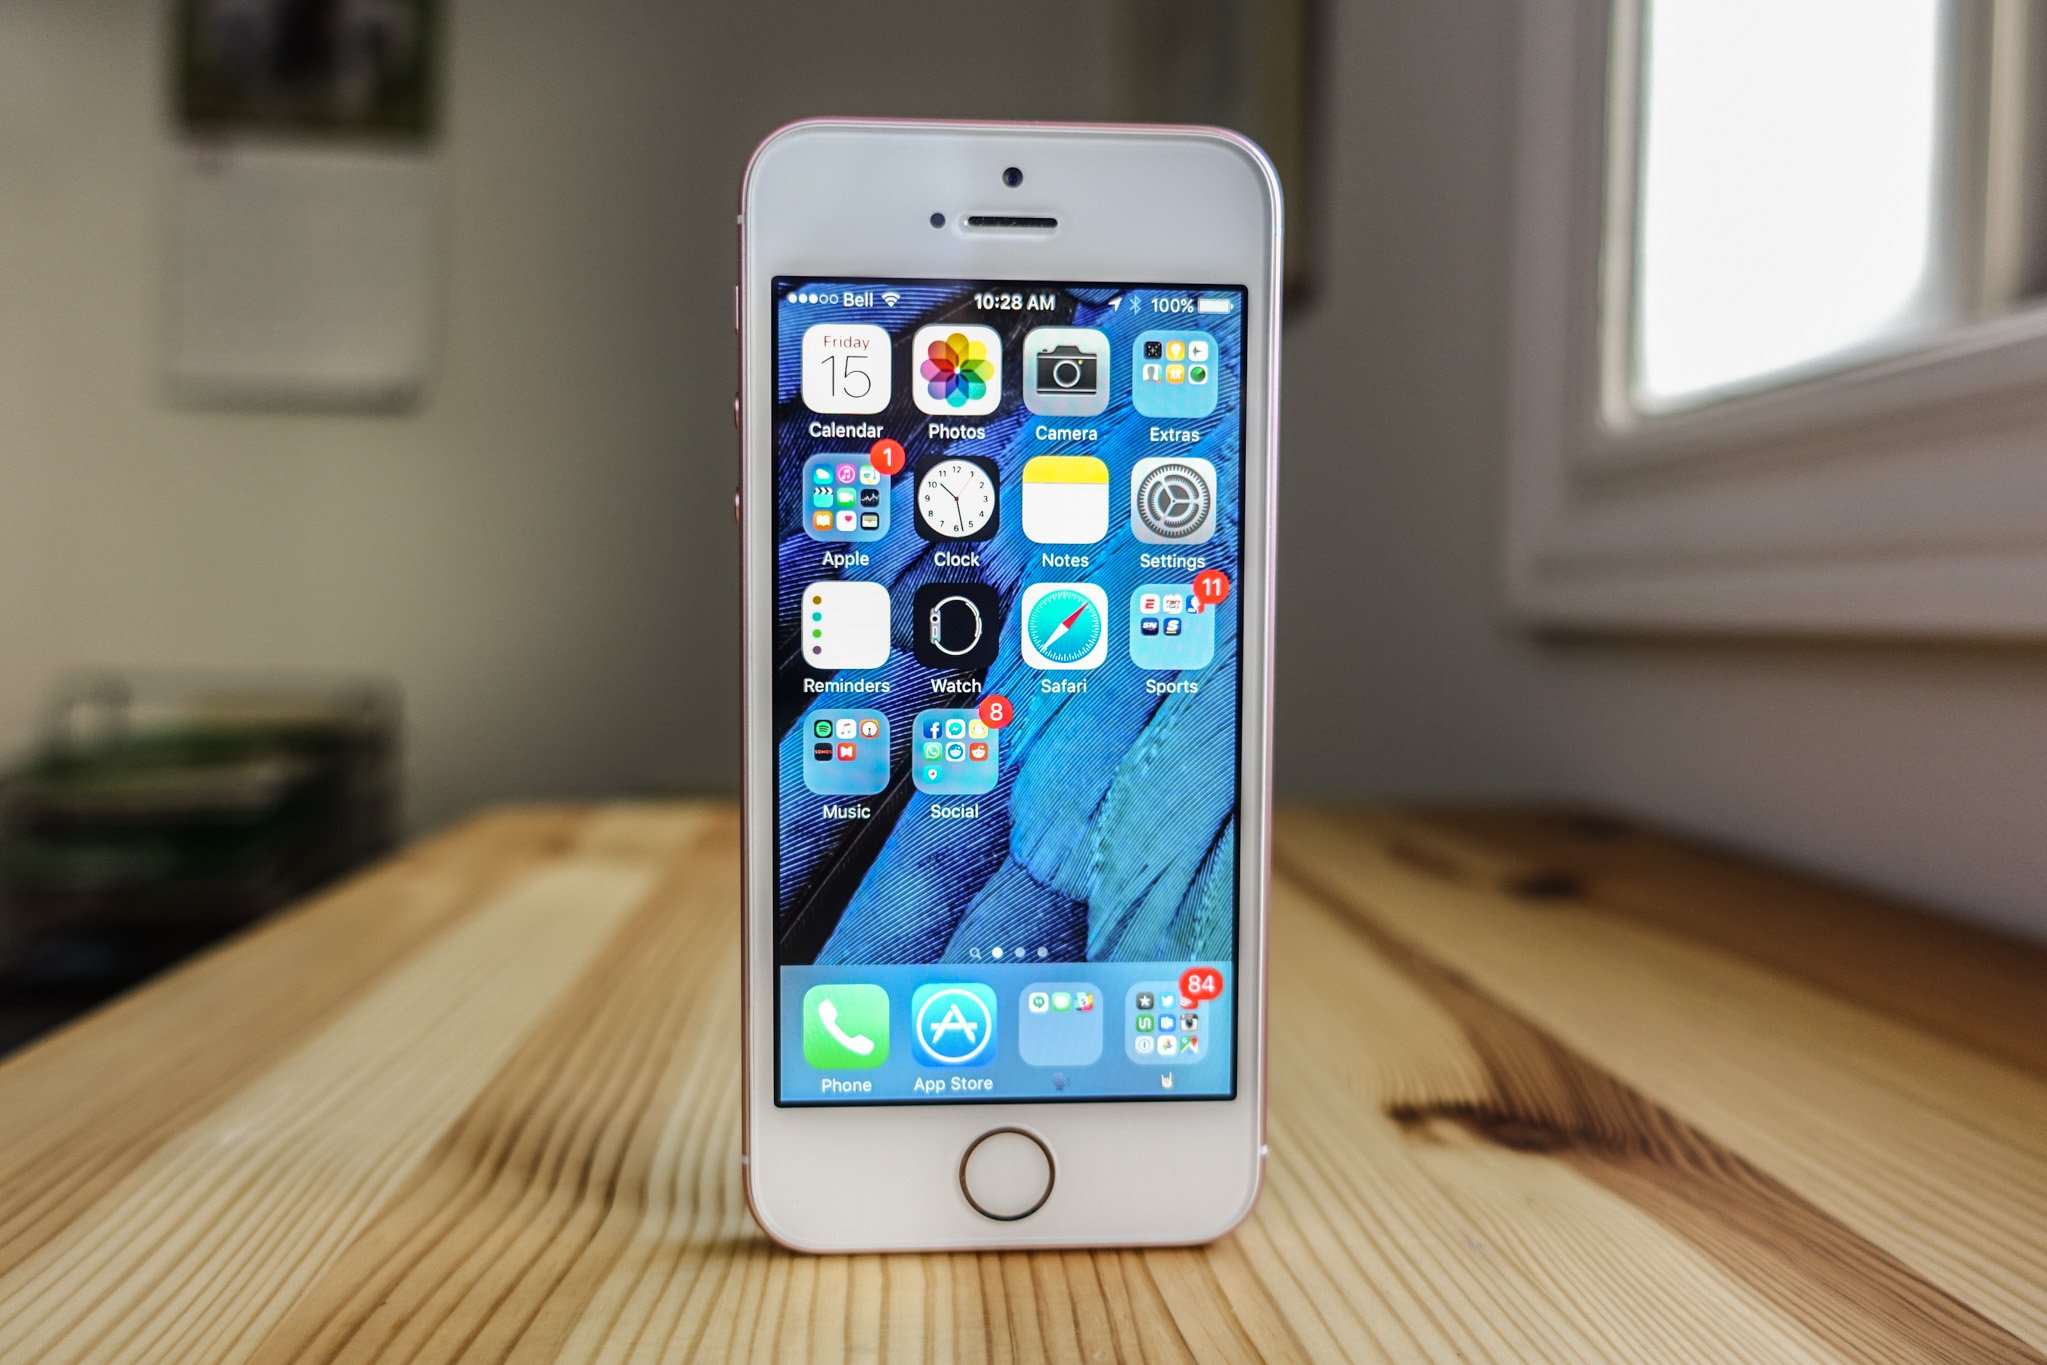 iphone 5s price and features